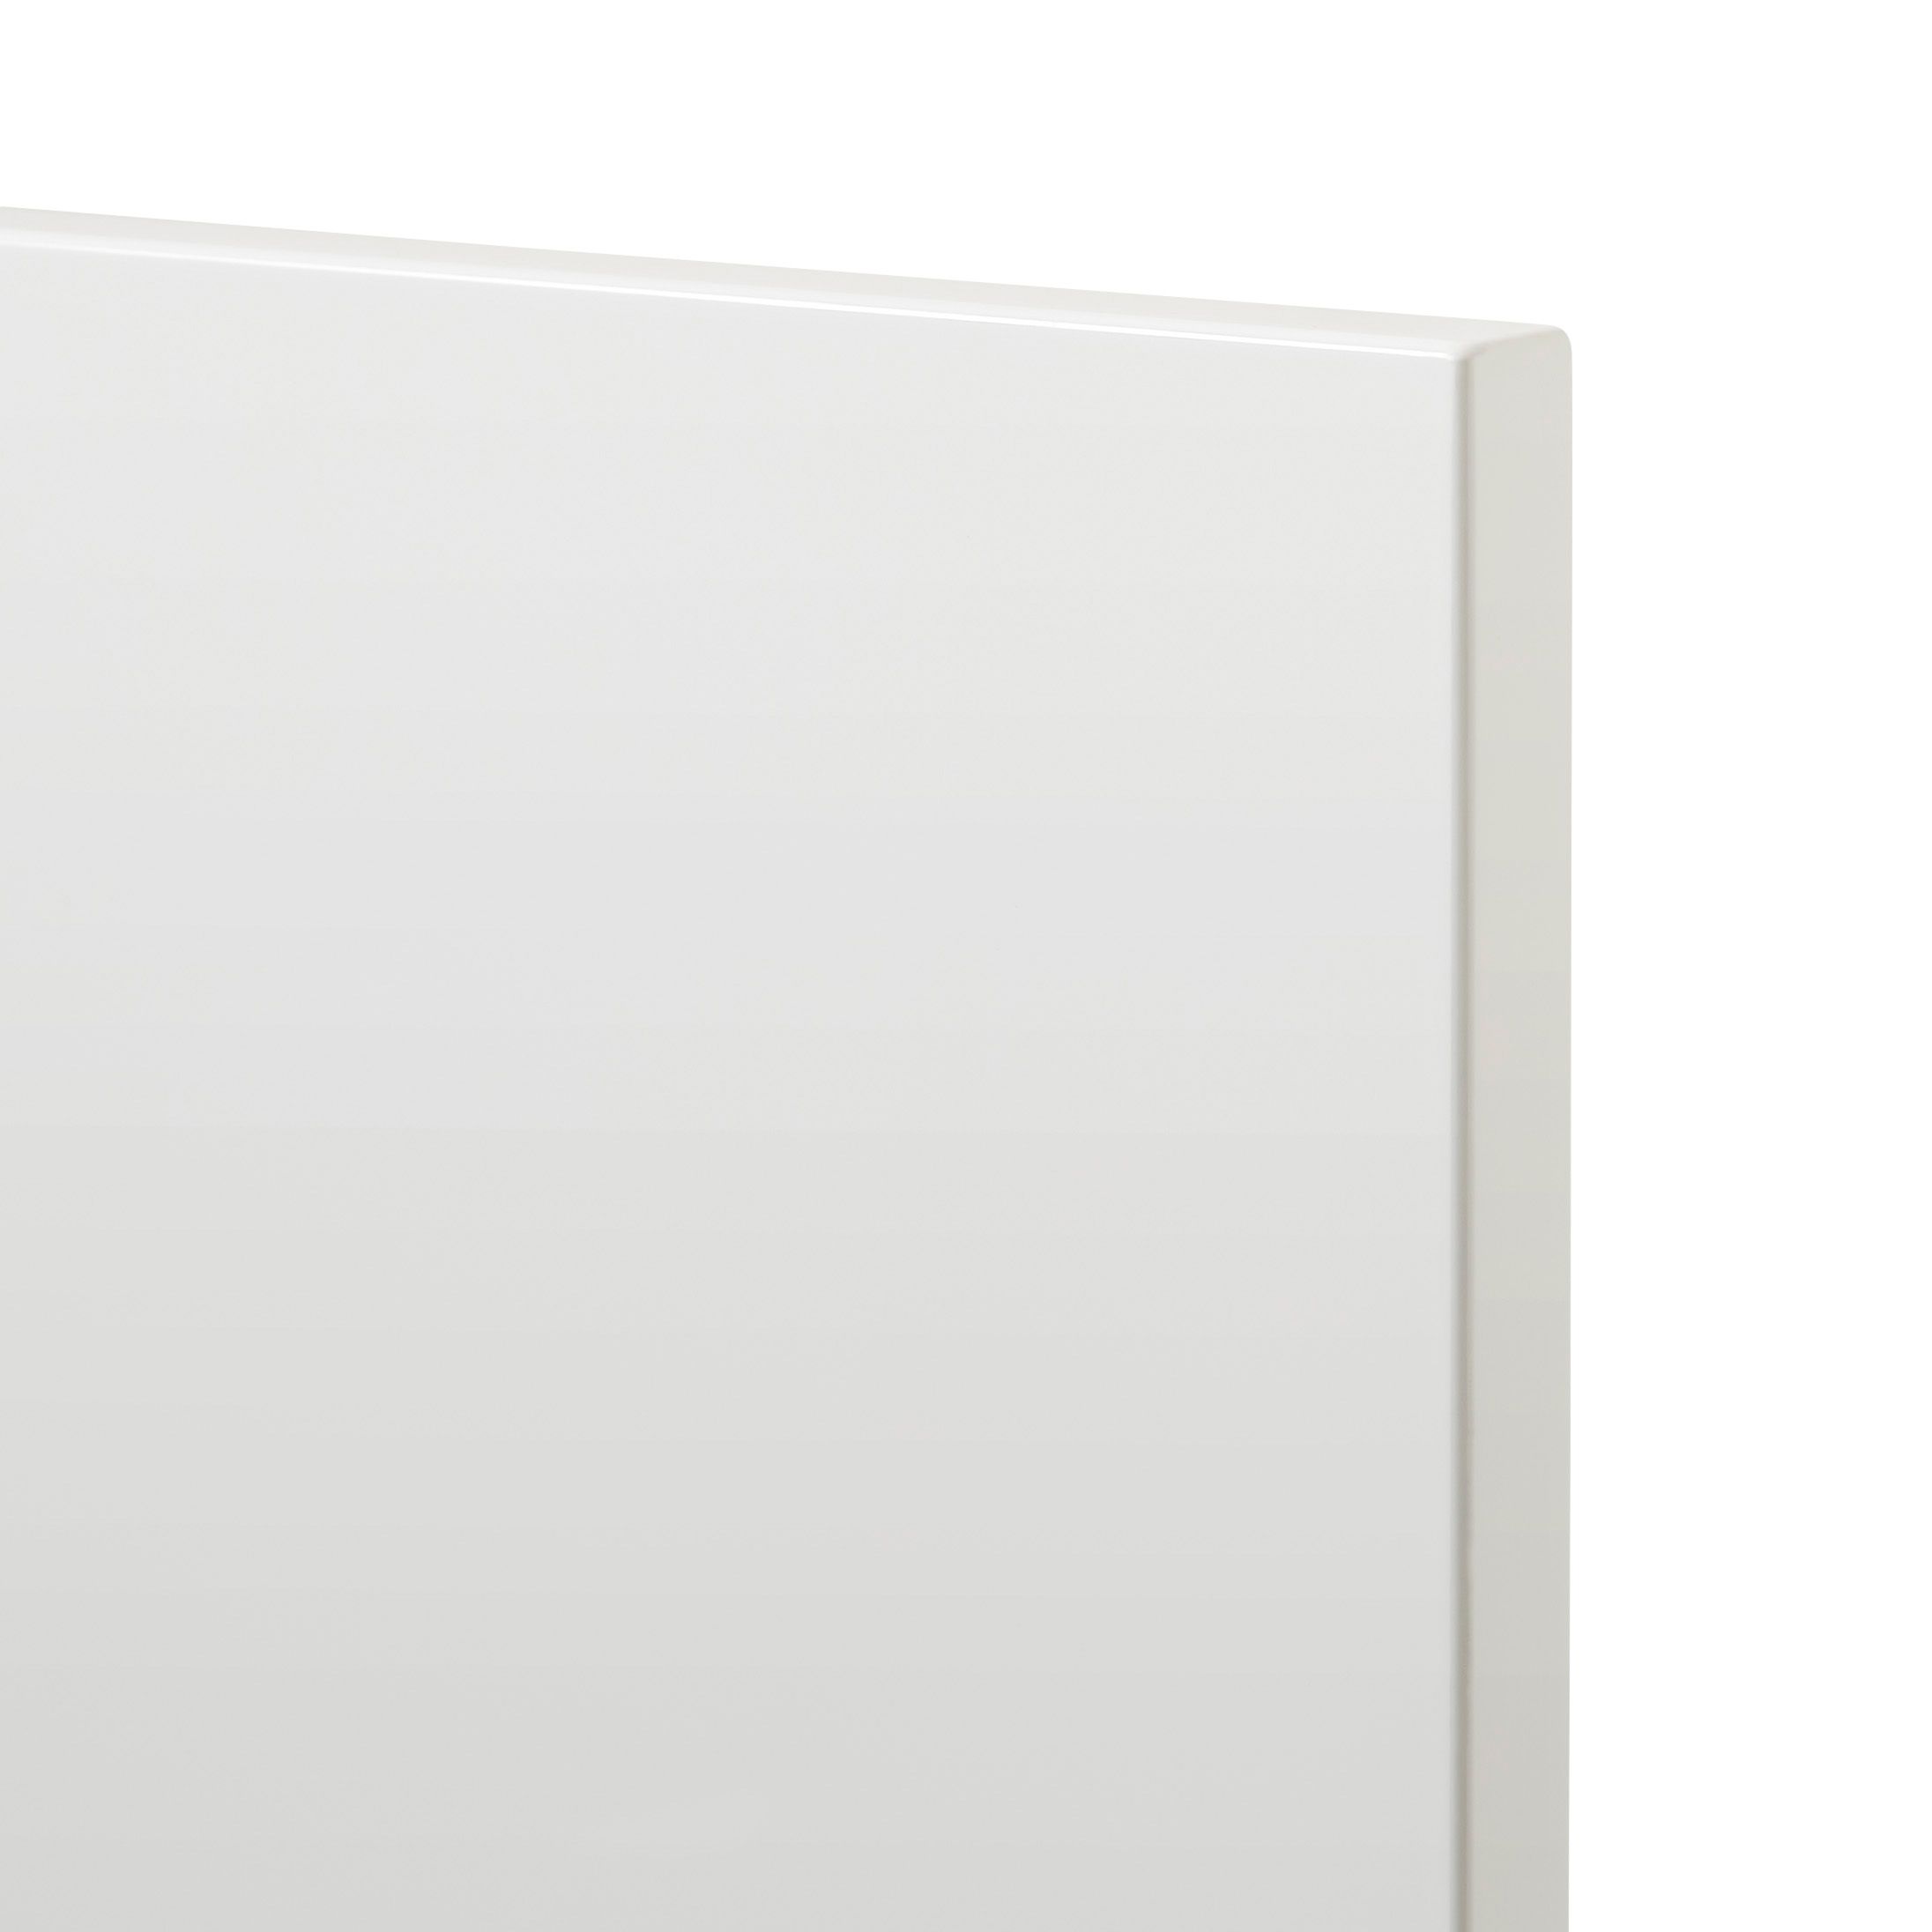 GoodHome Alisma High gloss white slab Drawer front (W)500mm, Pack of 4